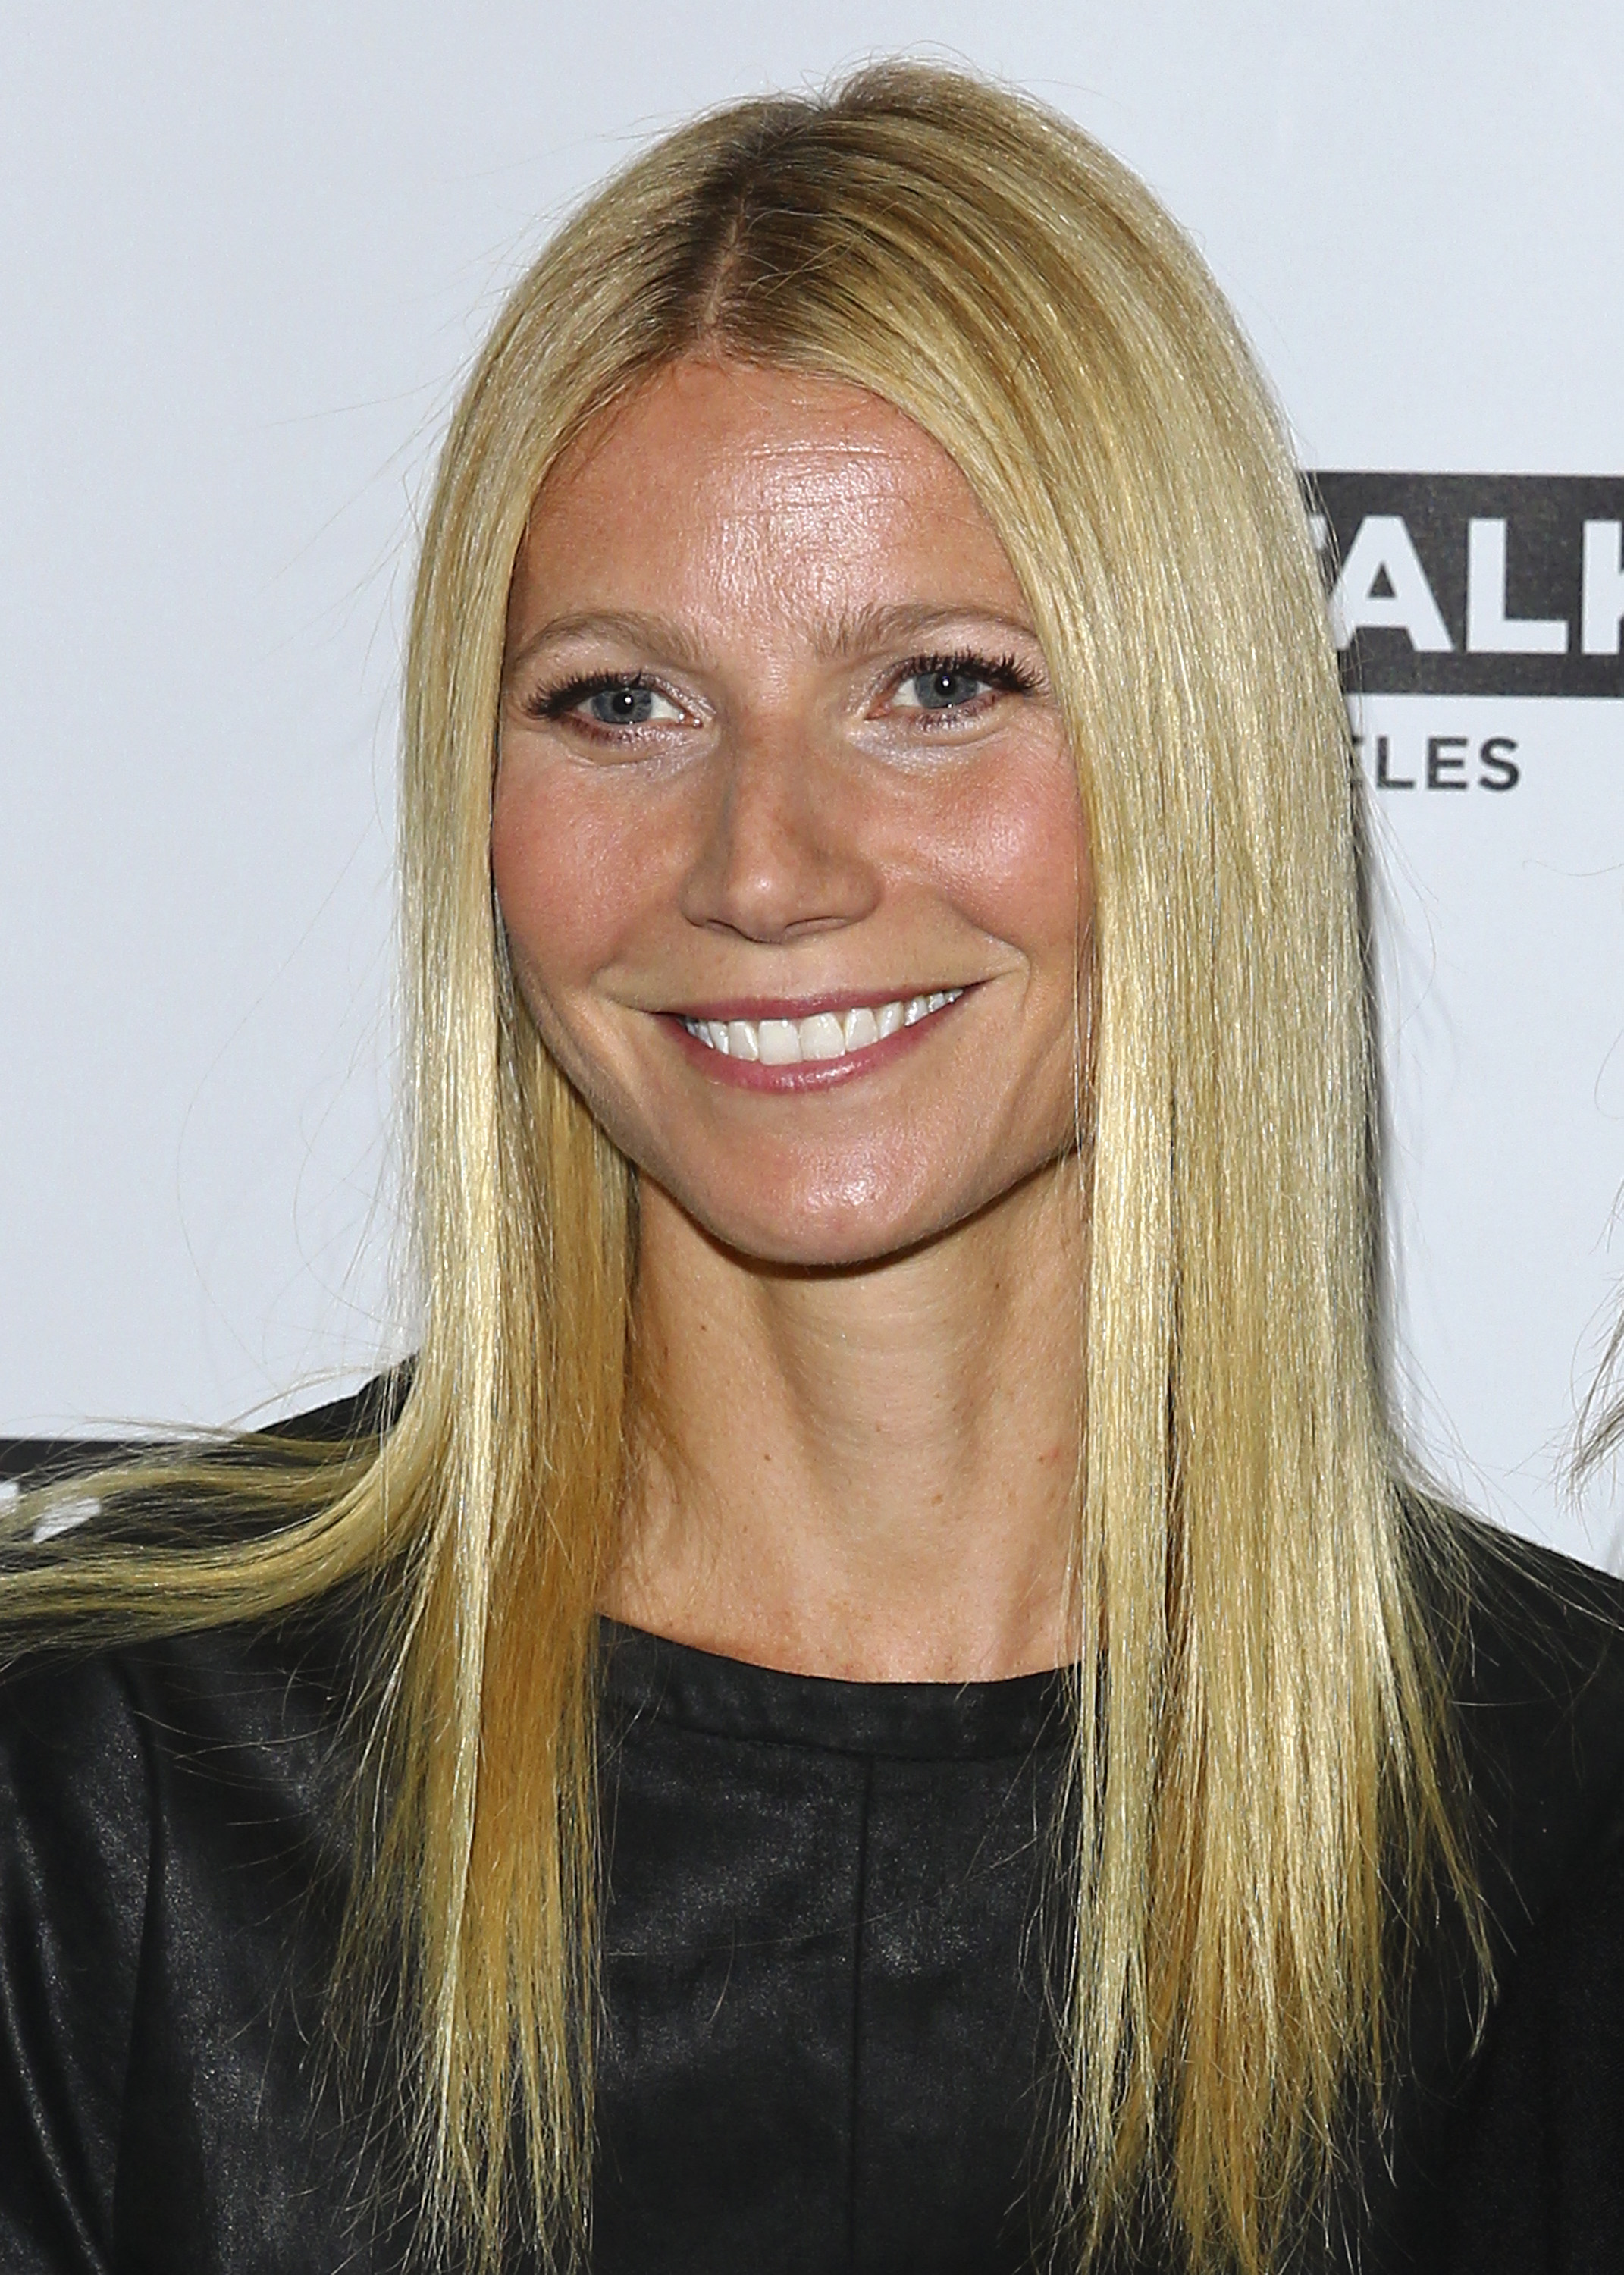 Live Talks Los Angeles Presents An Evening With Chelsea Handler In Conversation With Gwyneth Paltrow